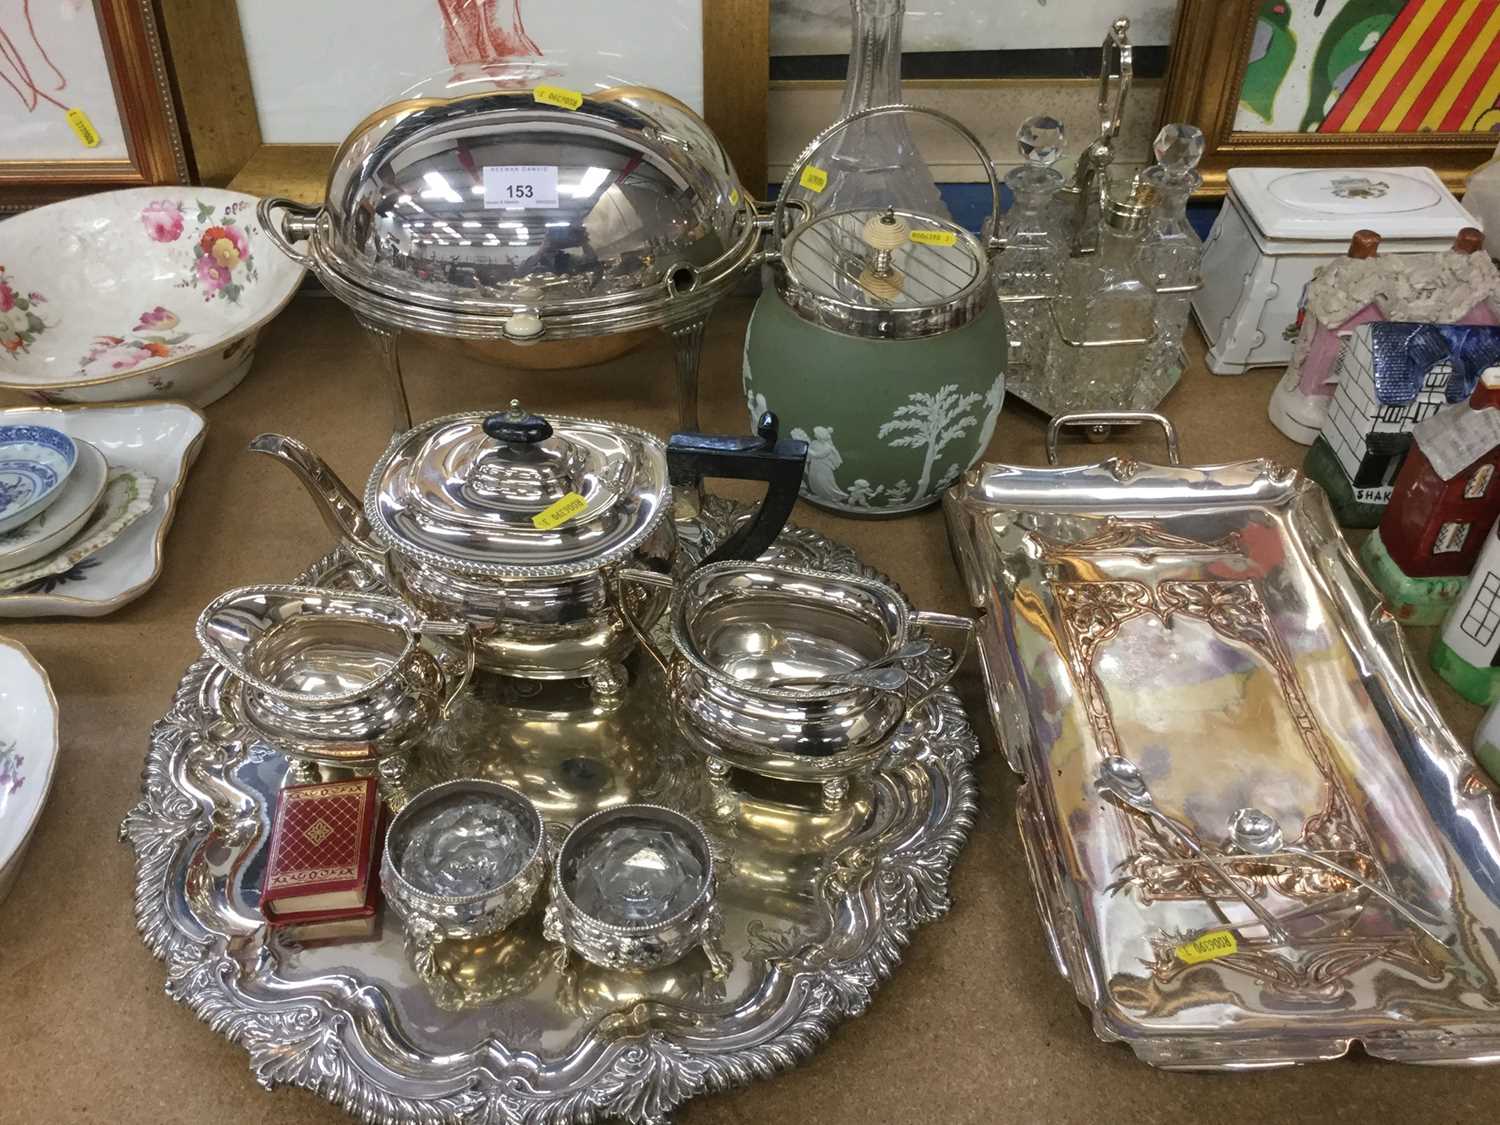 Group of various silver plate - tea set, trays, Wedgwood biscuit barrel, cruet stand and other items